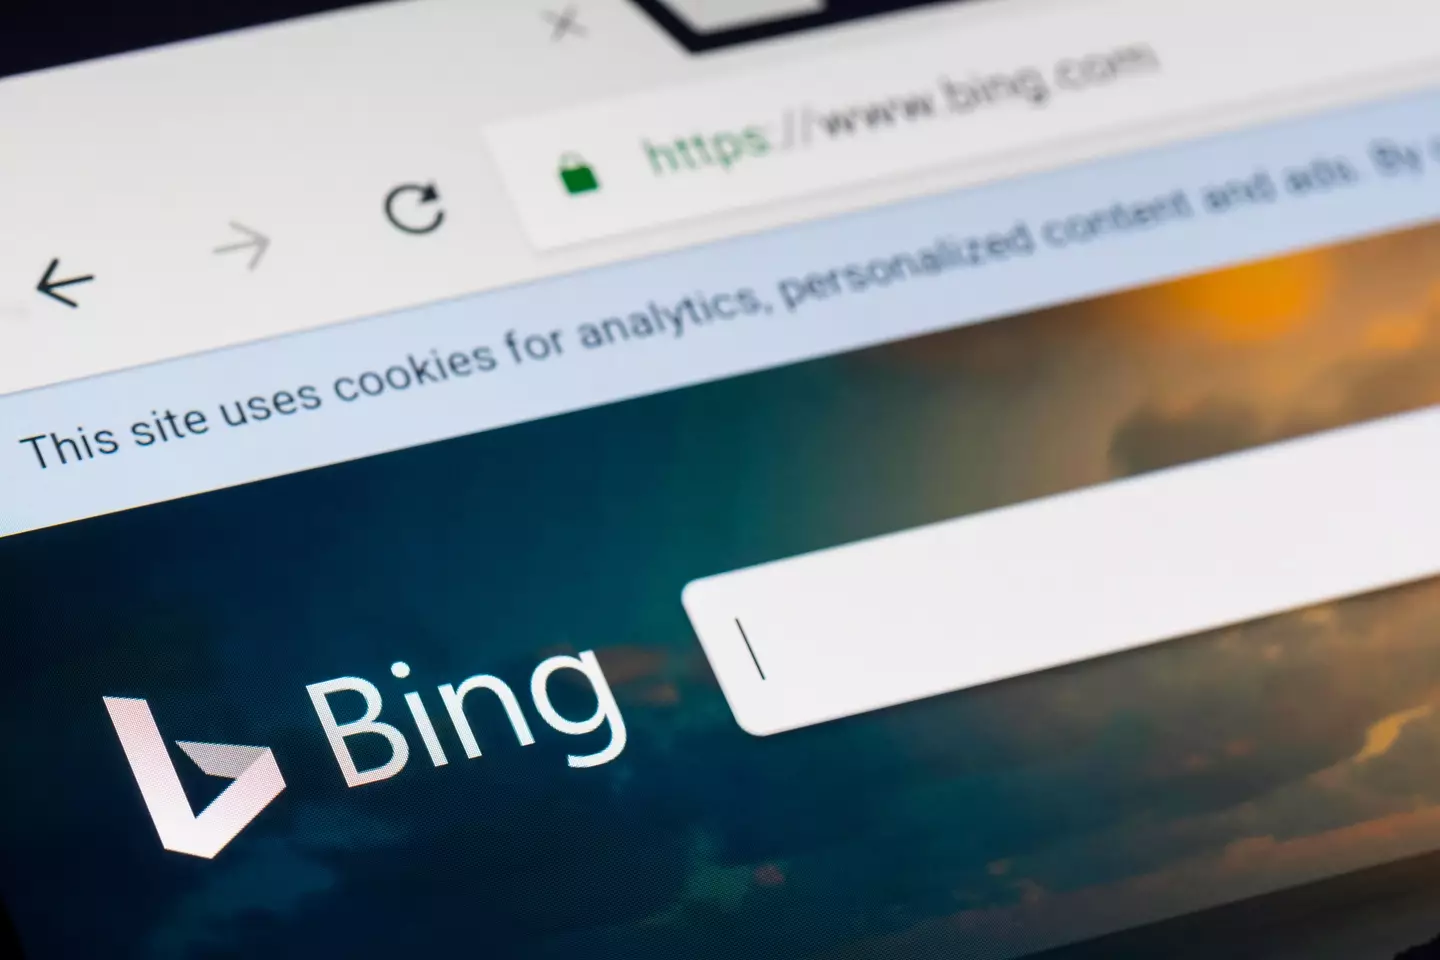 The chatbot is being rolled out to a select few users on Bing.